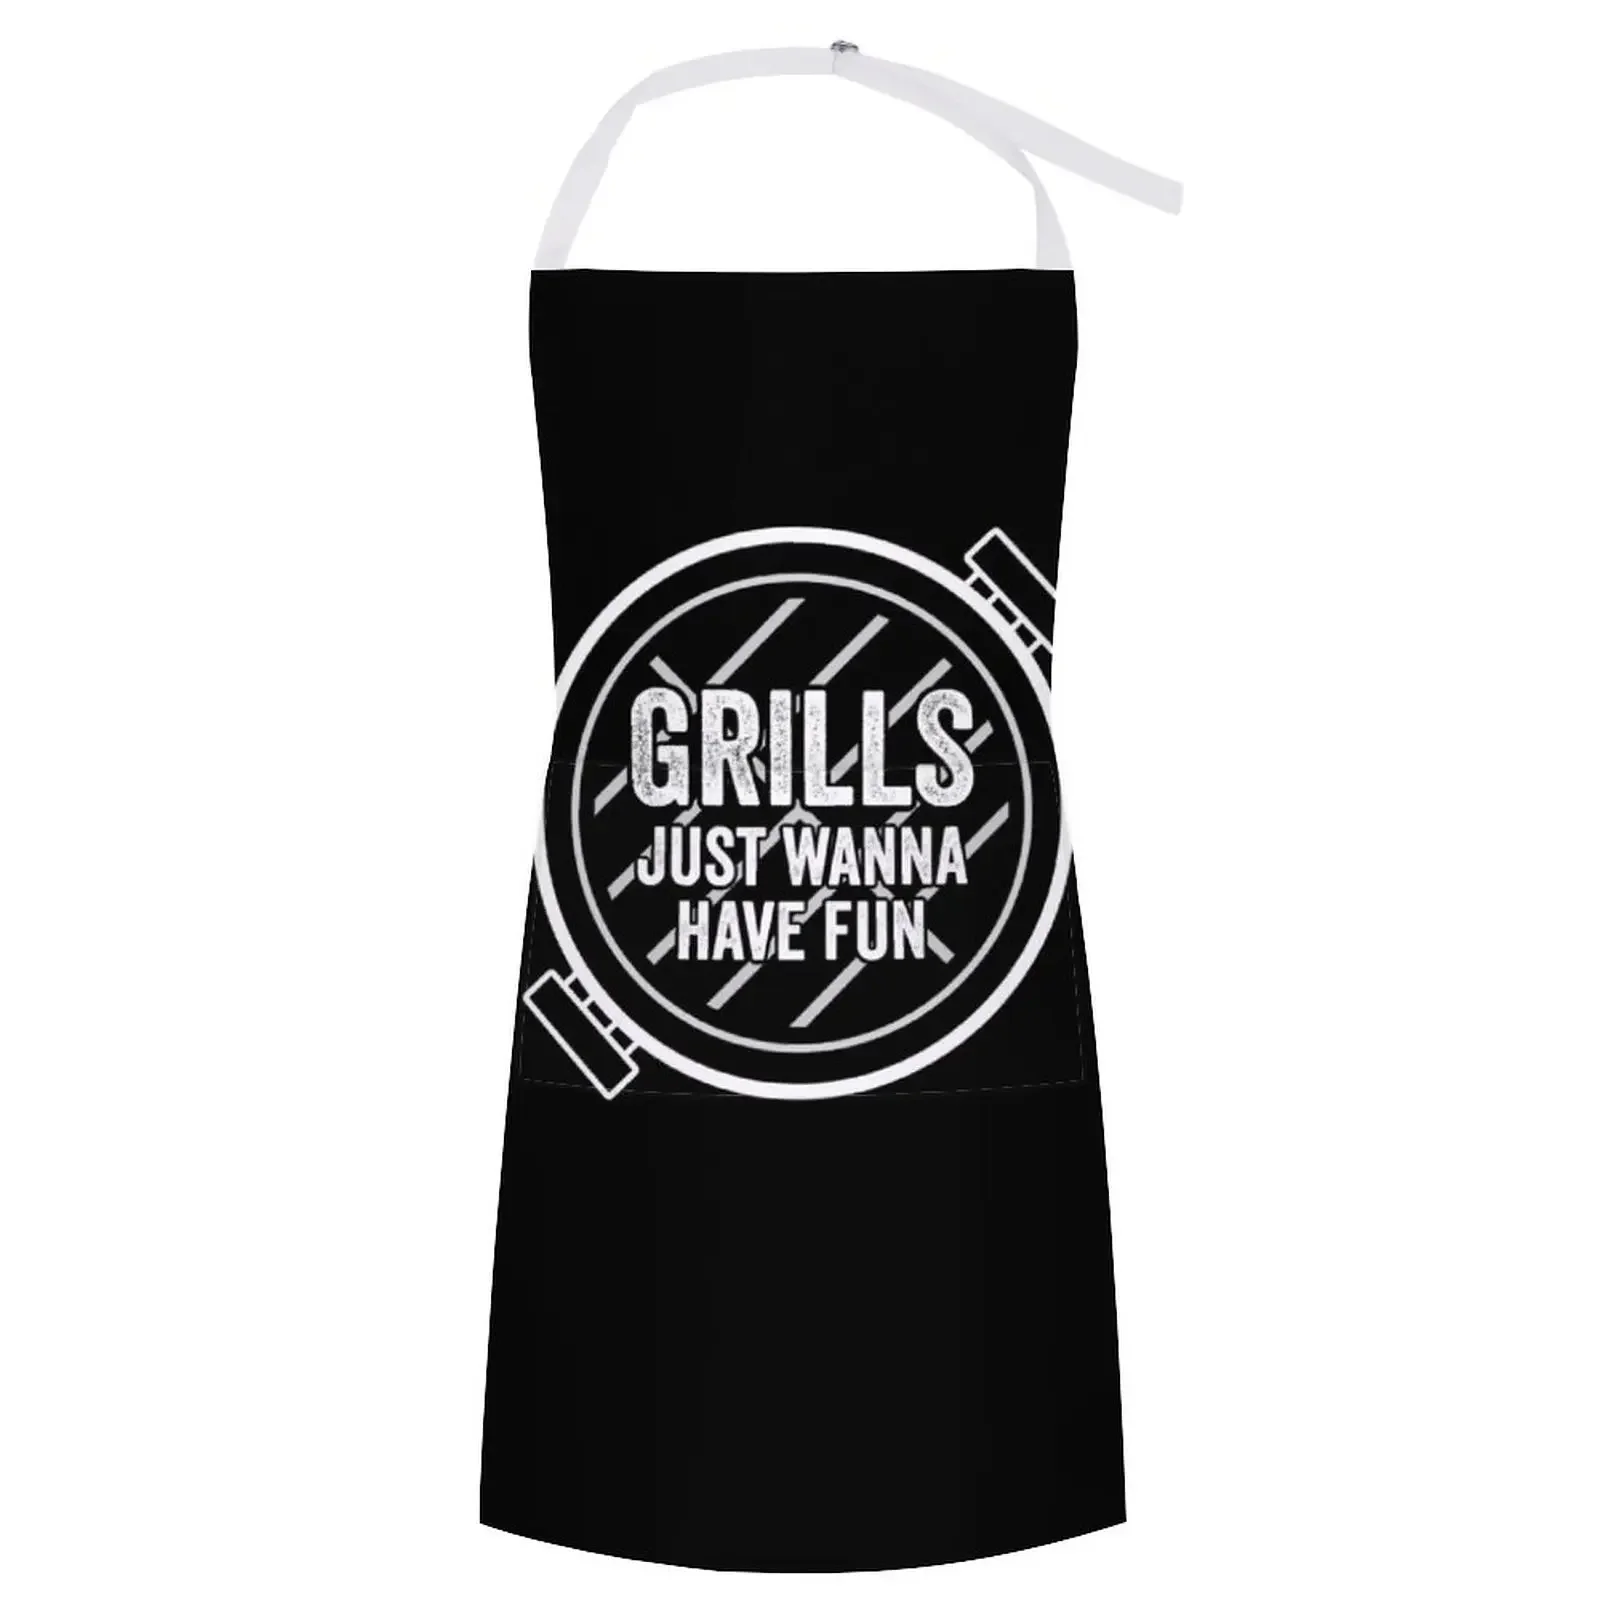 

Grills Just wanna Have Fun Apron Novelties Kitchen And Home Aprons Aprons For Man